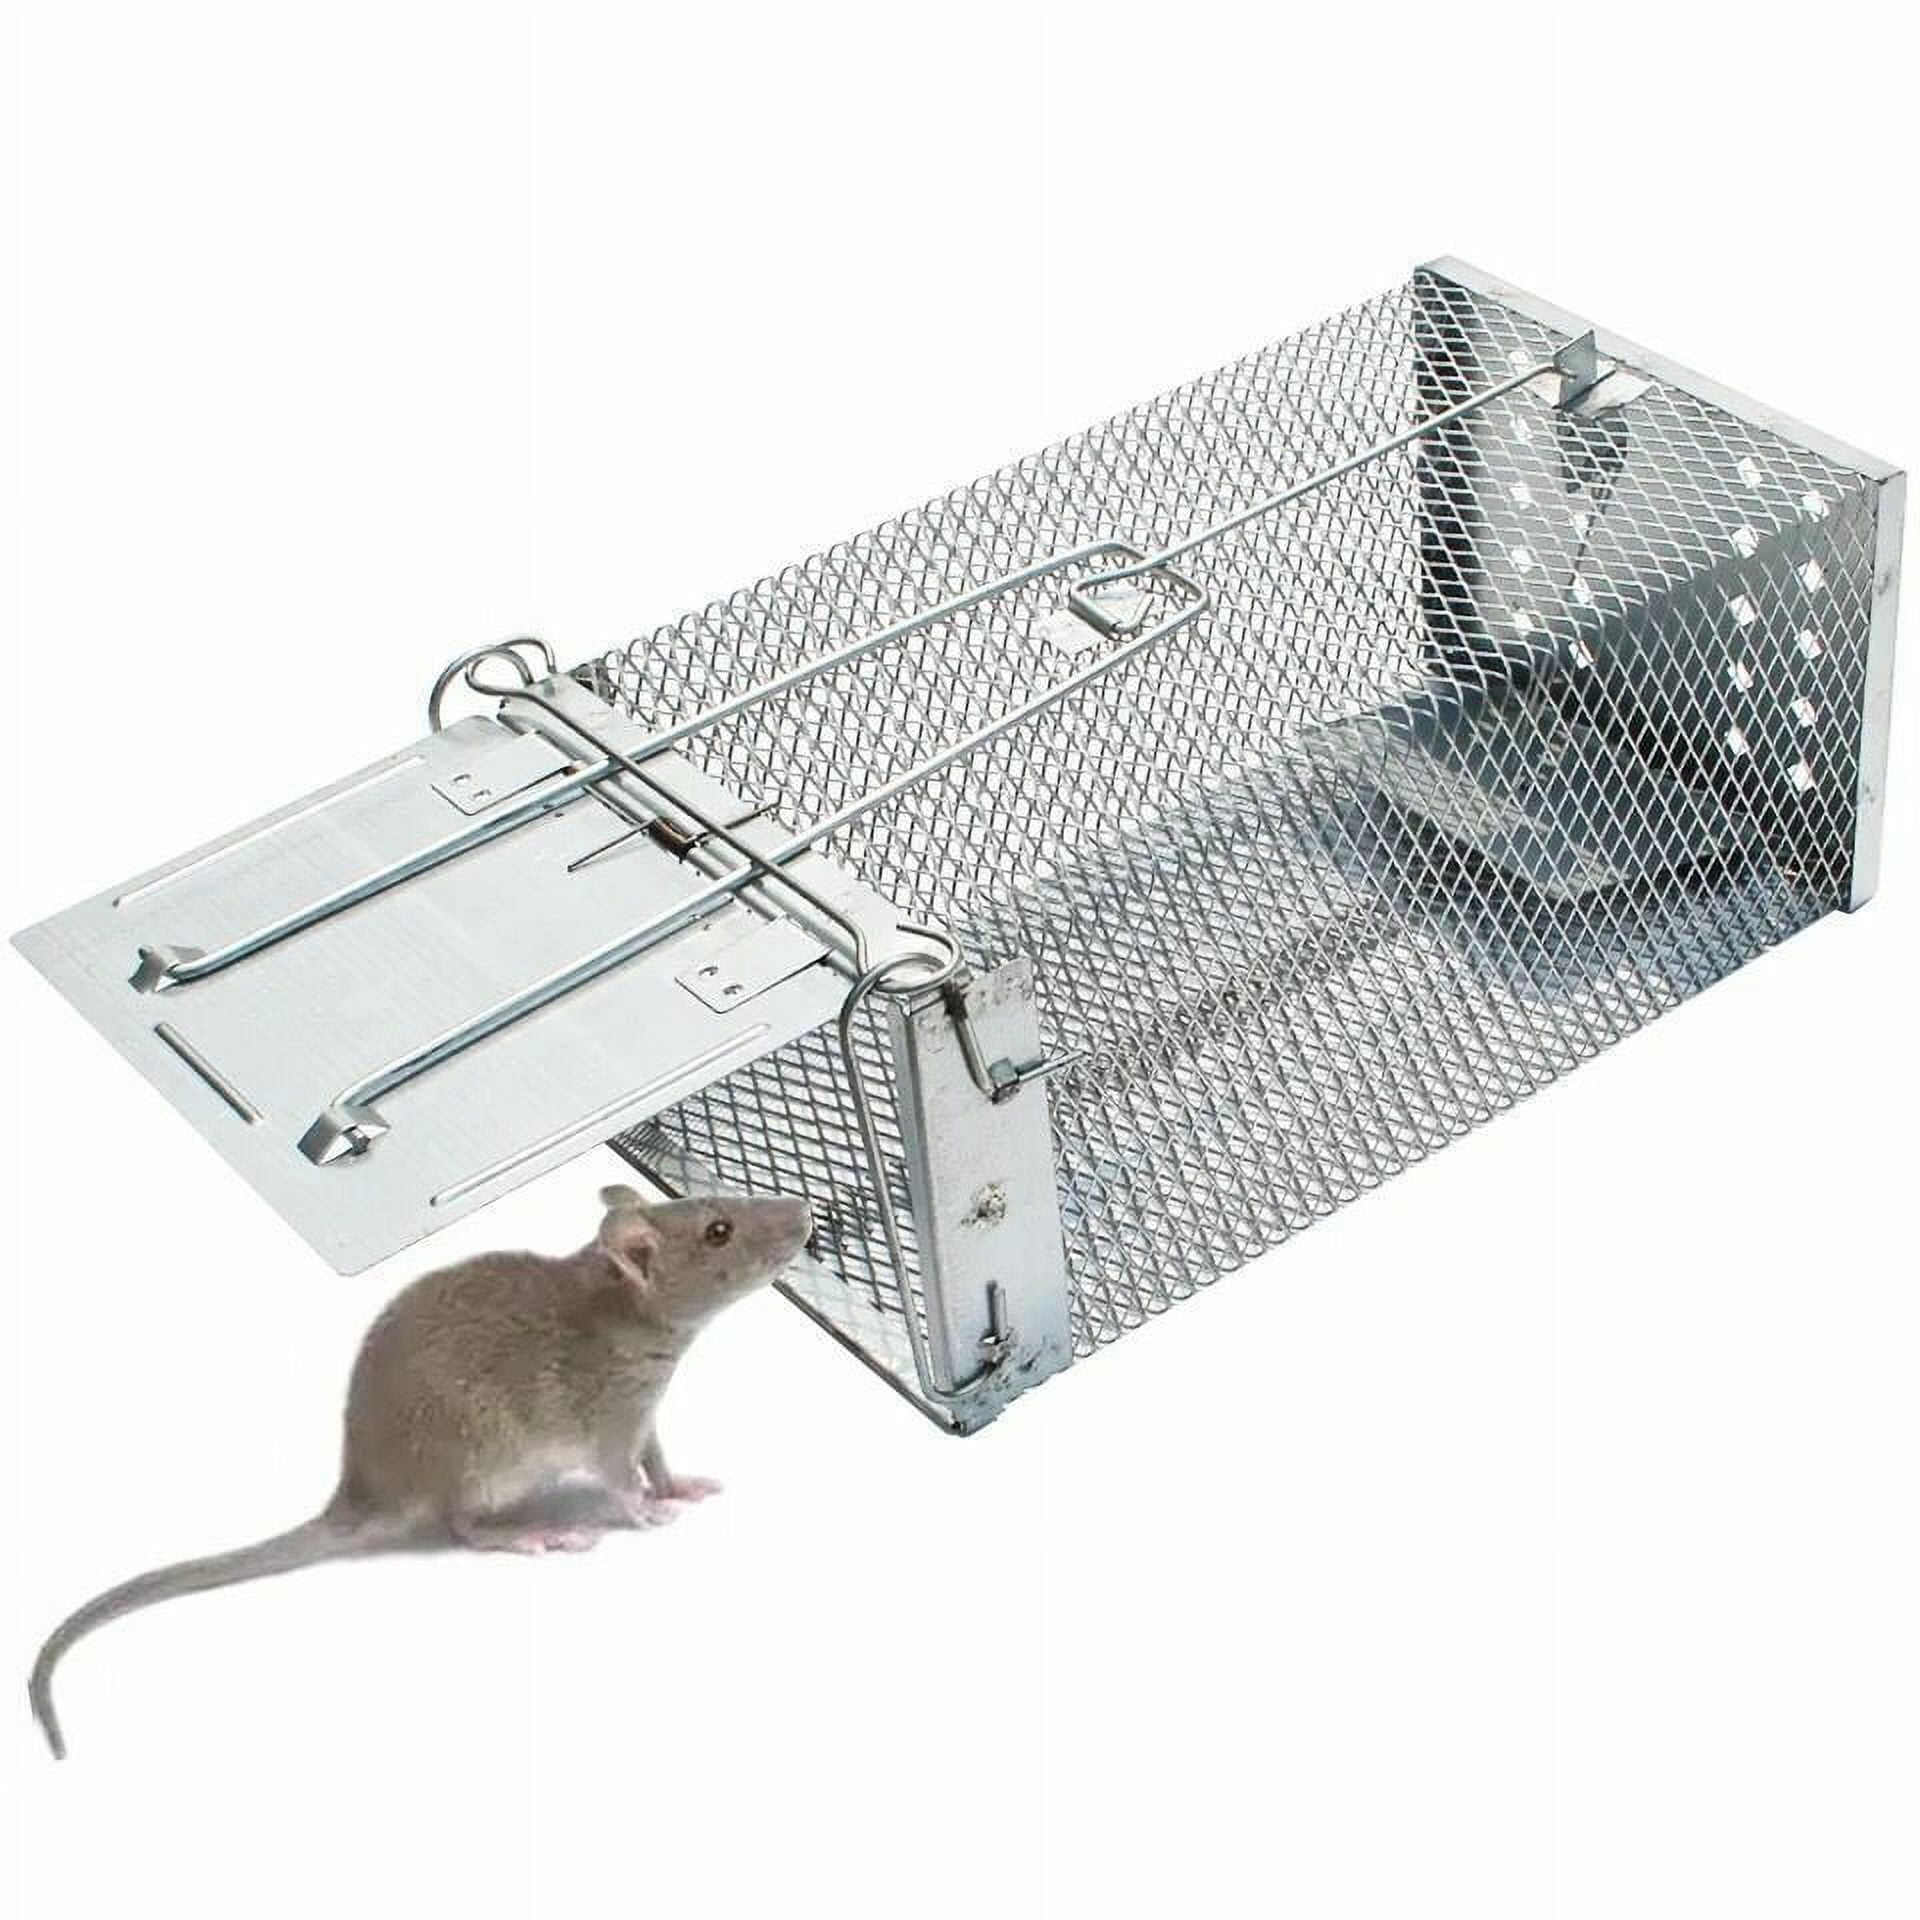 Harmless Rat Trap Cage Metal Home Automatic Mousetrap Rat Rodent